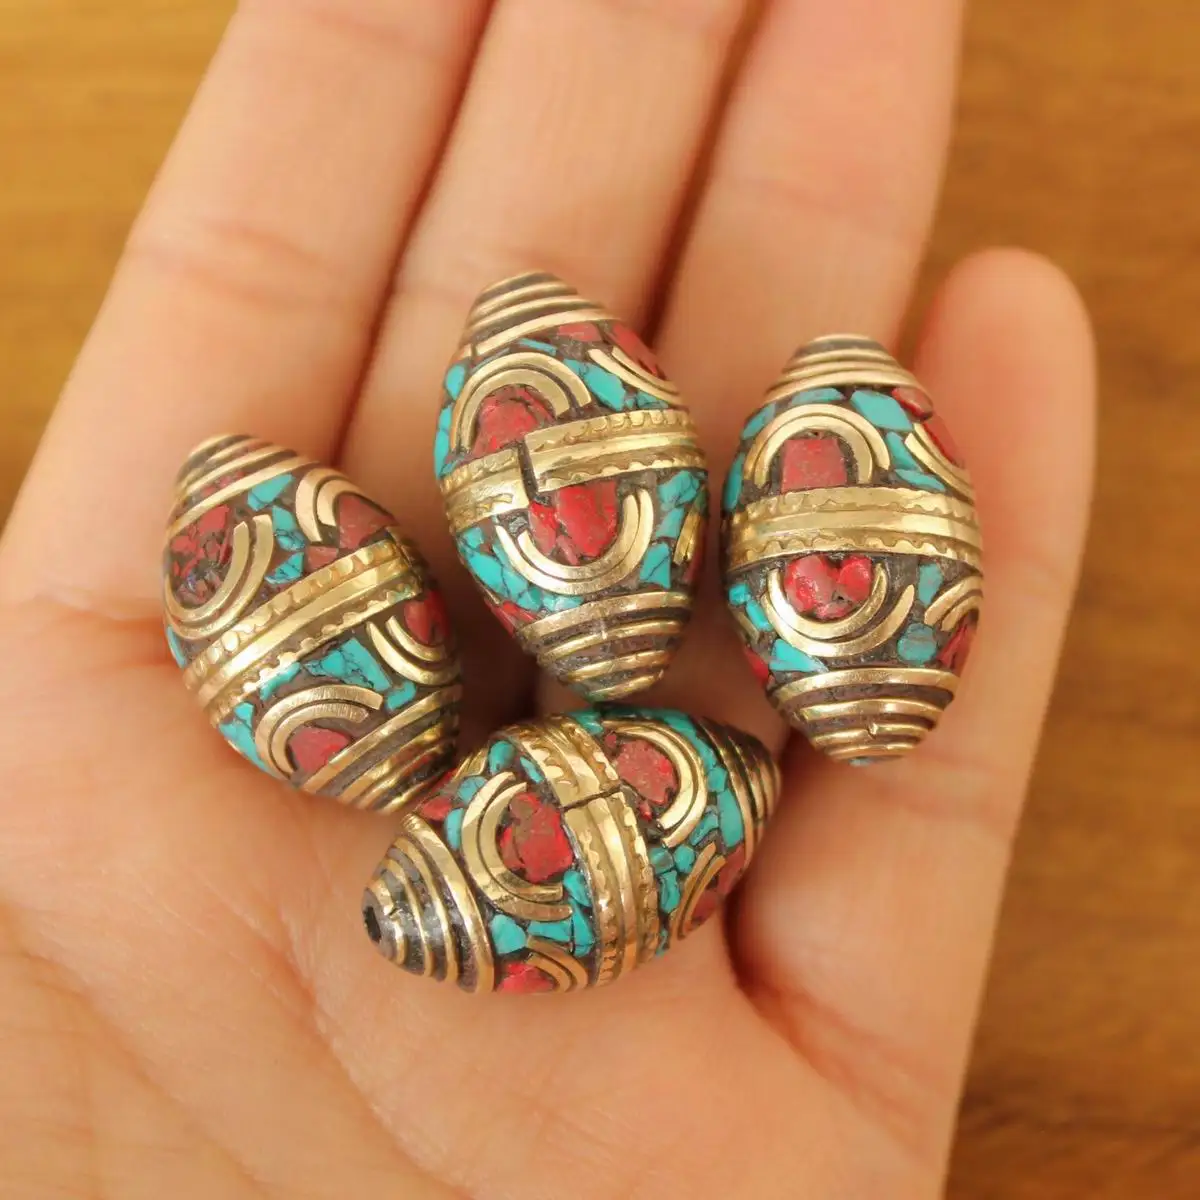 BD229  Nepal Handmade Brass Inlaid Turquoises Coral Stone Beads For Jewelry Making  Tibetan Oval Diy Beads 4 PCS Beads Lot